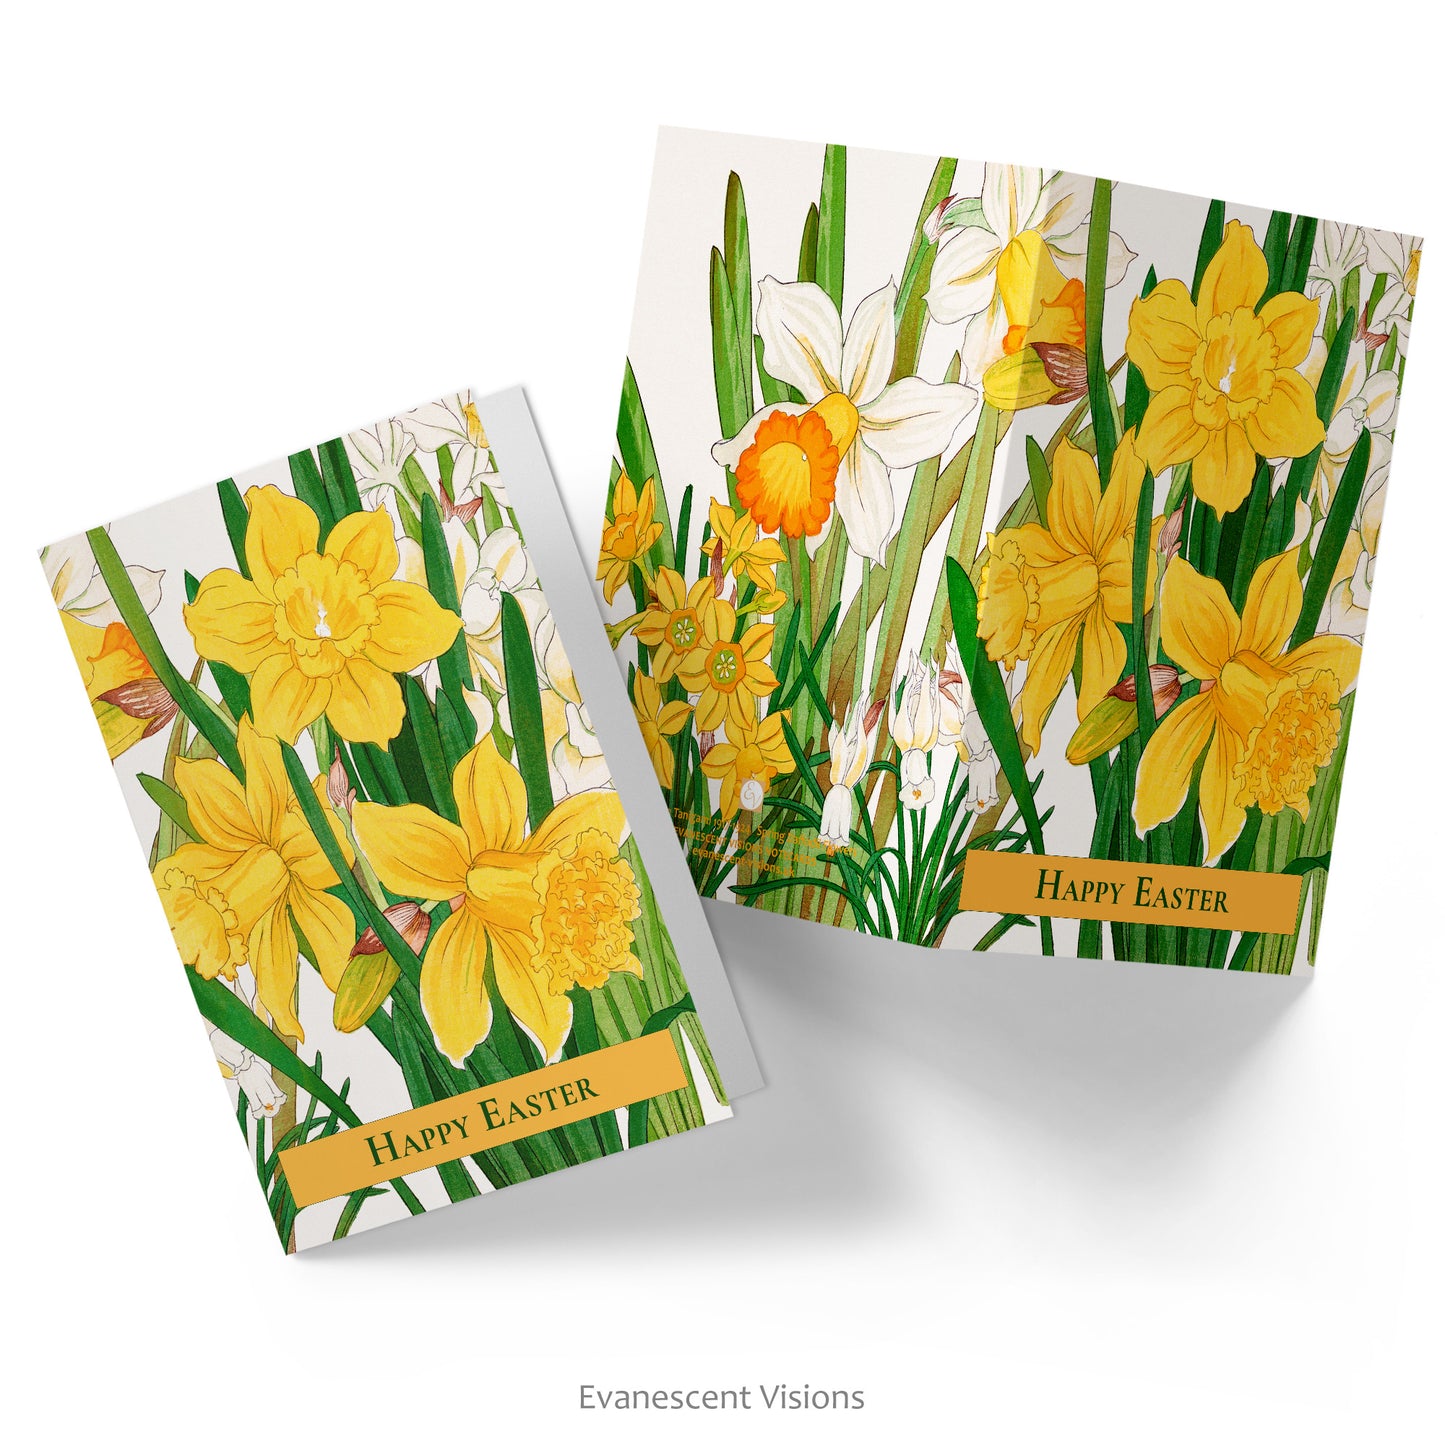 Wraparound design floral Easter card shown open printed front and back and closed with images from a woodblock design of daffodils by Kônan Tanigami